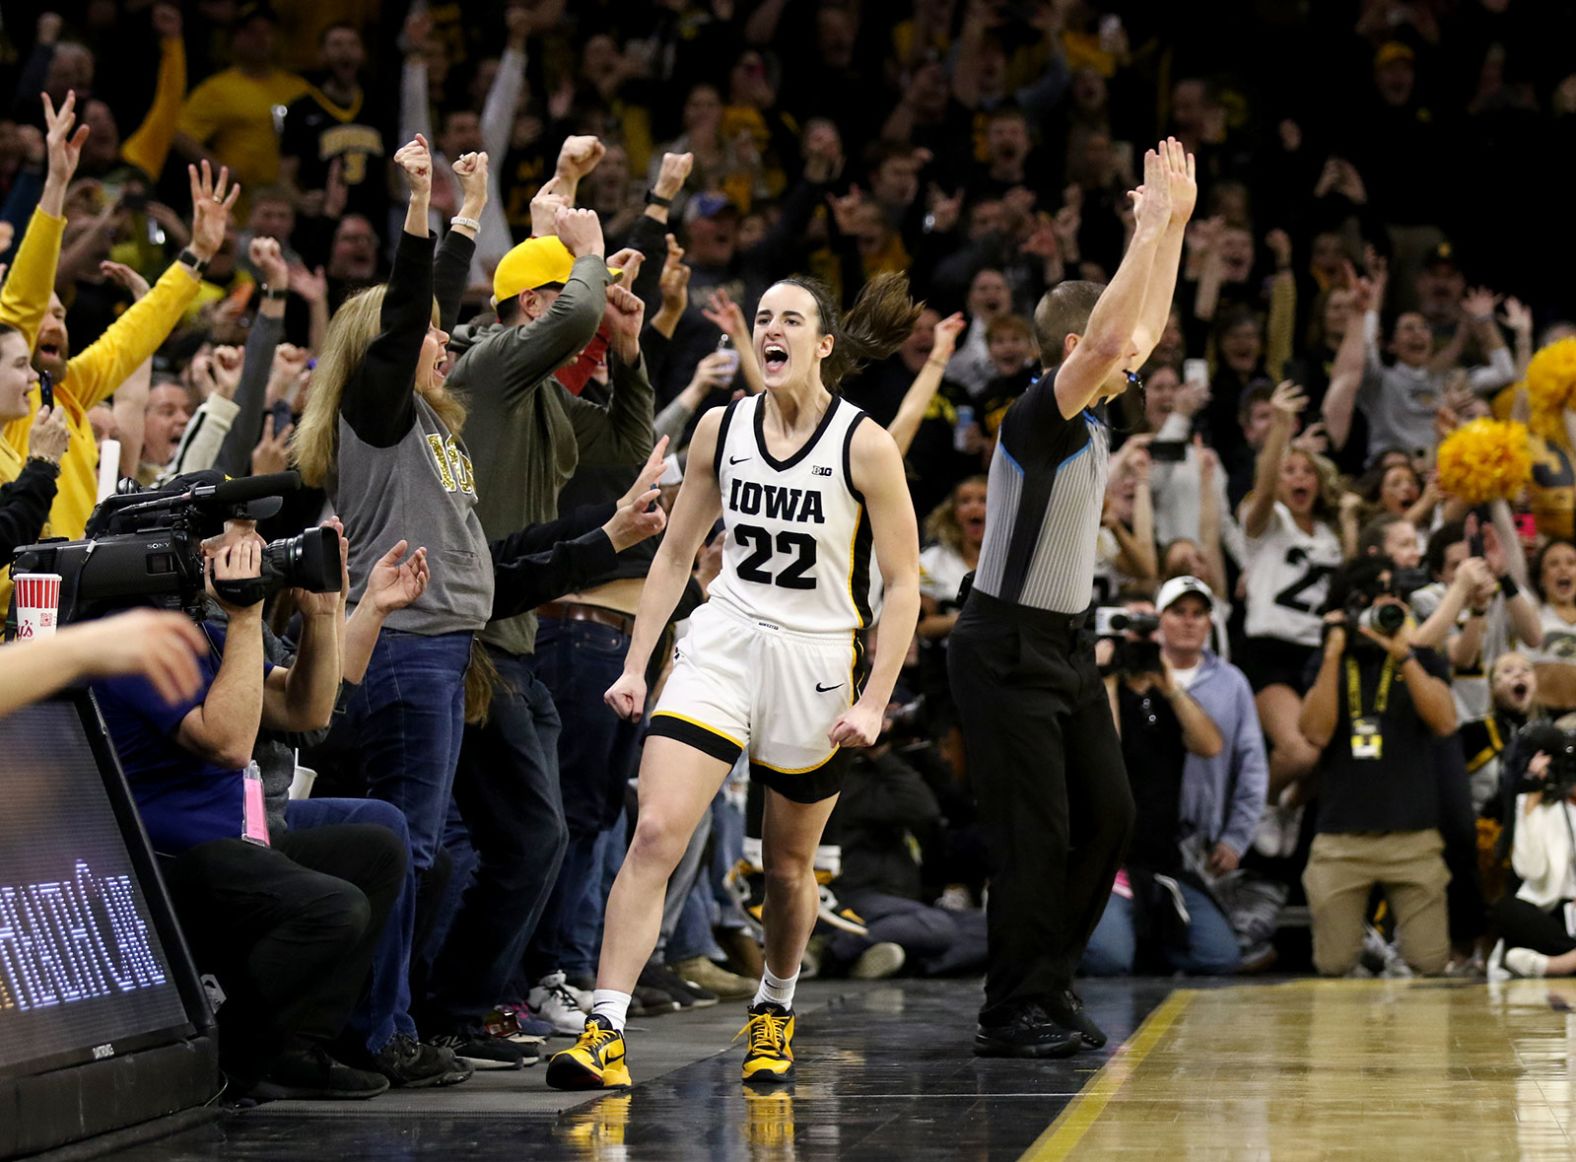 Iowa star Caitlin Clark celebrates after she hit a 3-pointer against Michigan to become the all-time leading scorer in NCAA women's basketball on Thursday, February 15. Clark surpassed the previous record of 3,527 career points, which was set by Kelsey Plum.